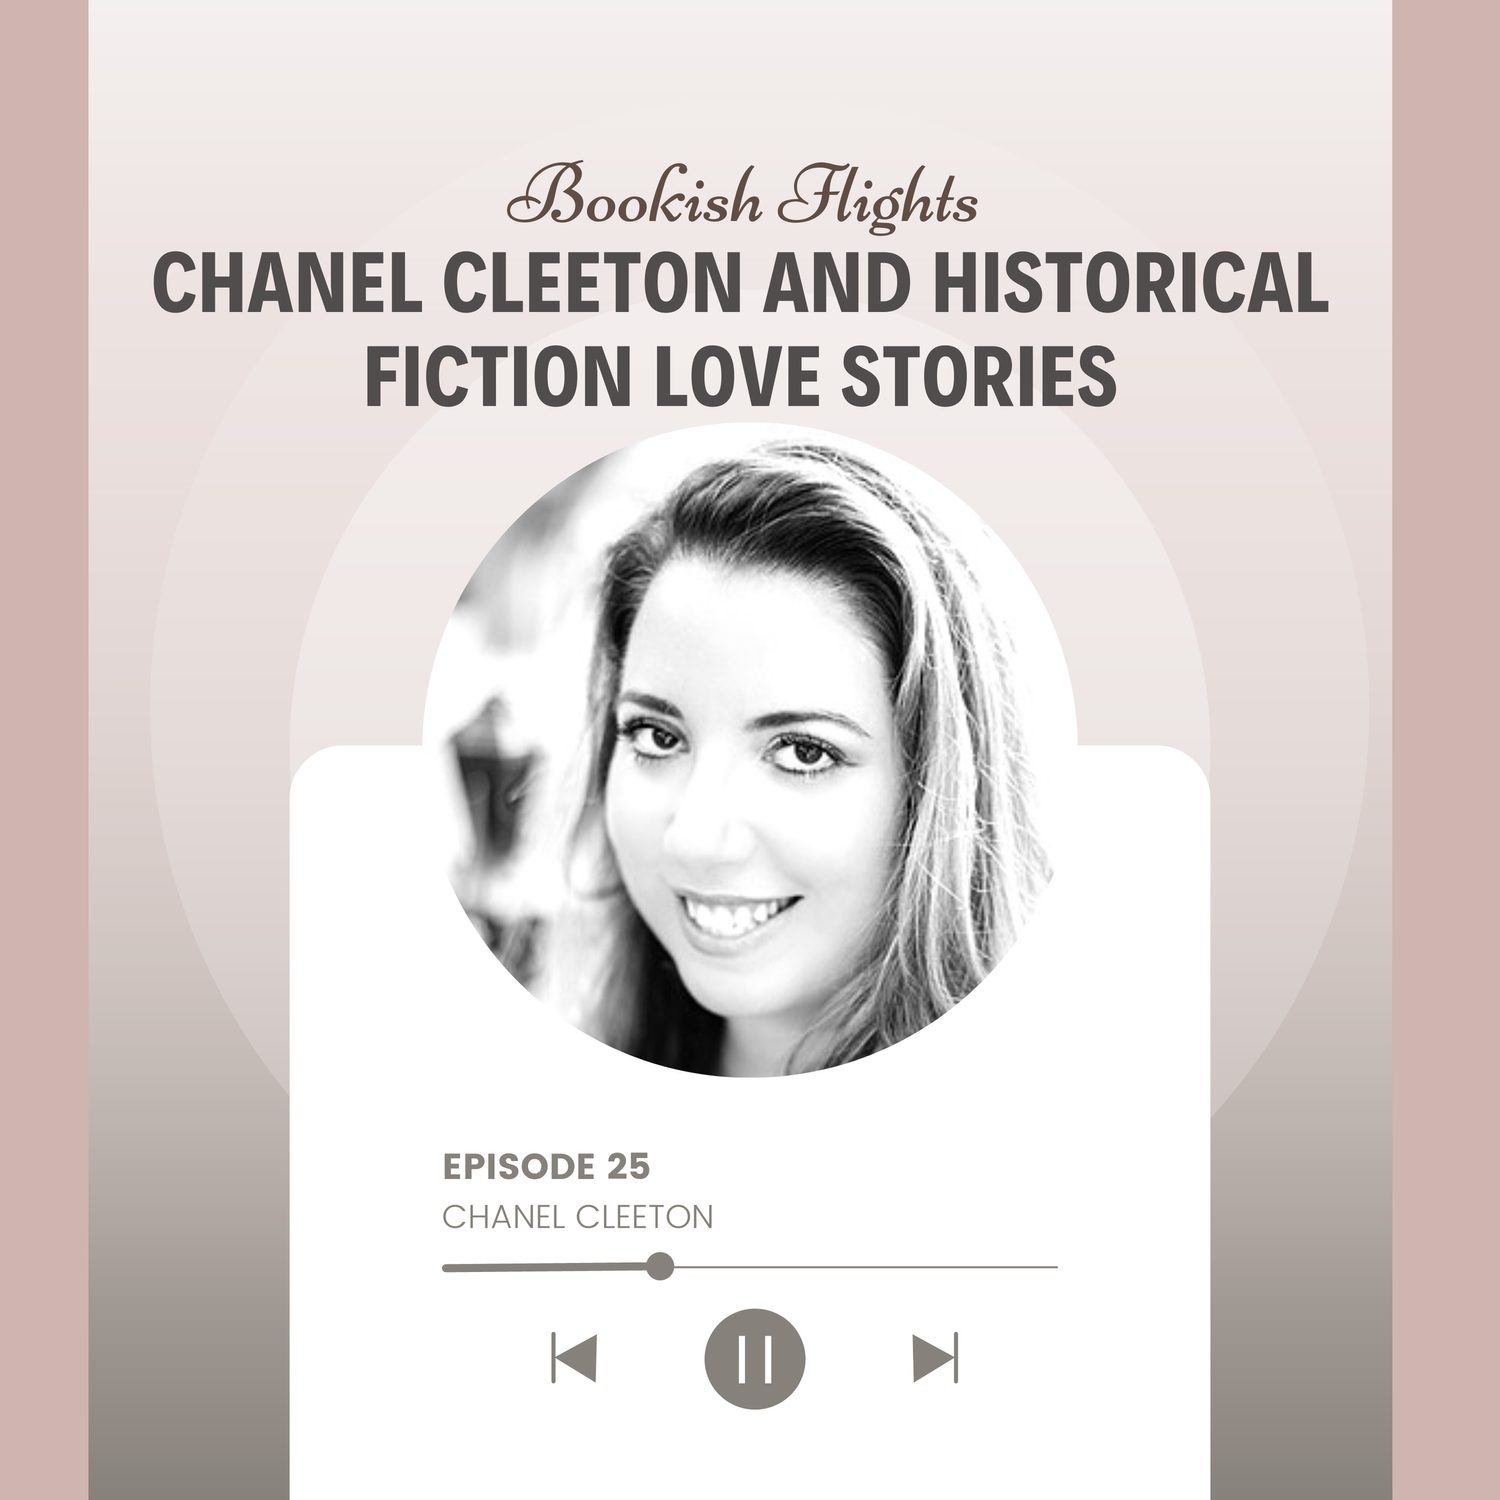 Chanel Cleeton and Historical Fiction Love Stories (E25) — Bookish Flights